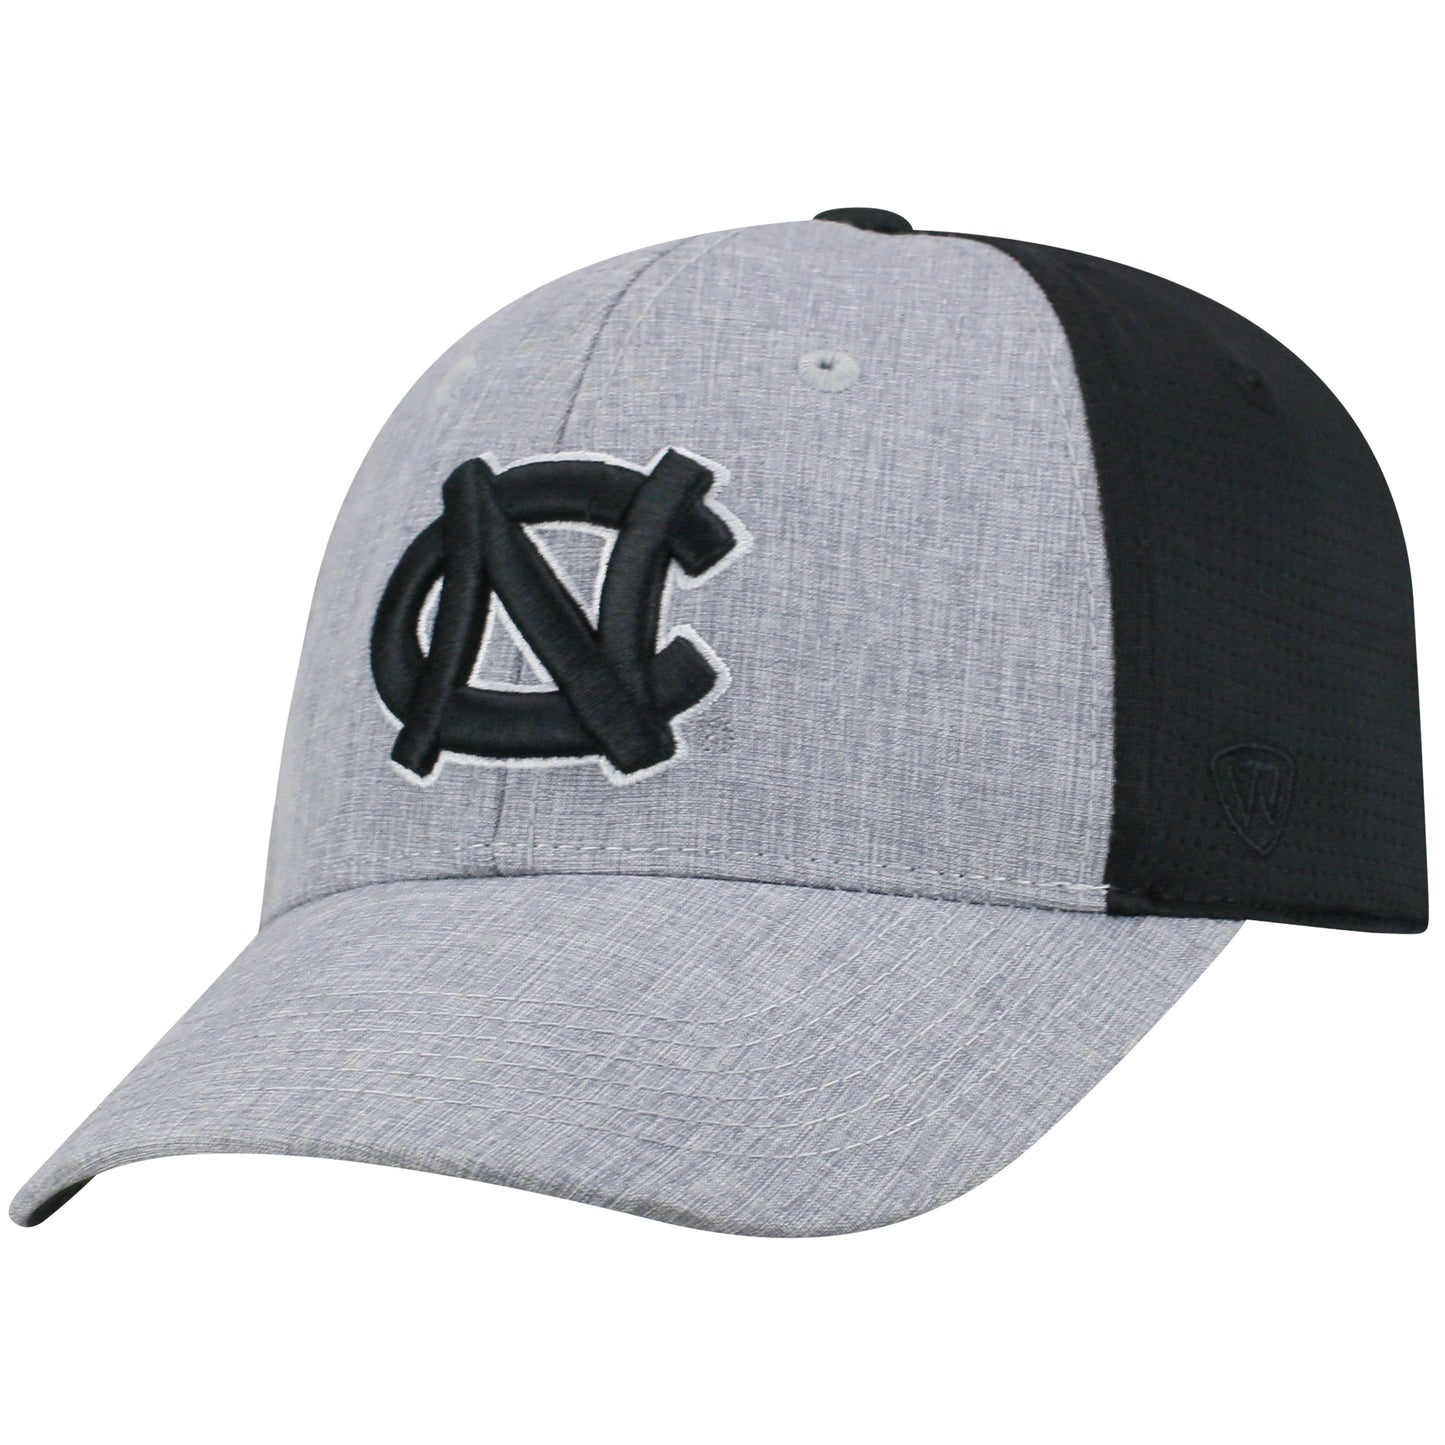 Mens North Carolina Tar Heels Fabooia One Fit Flex Fit Hat By Top Of The World